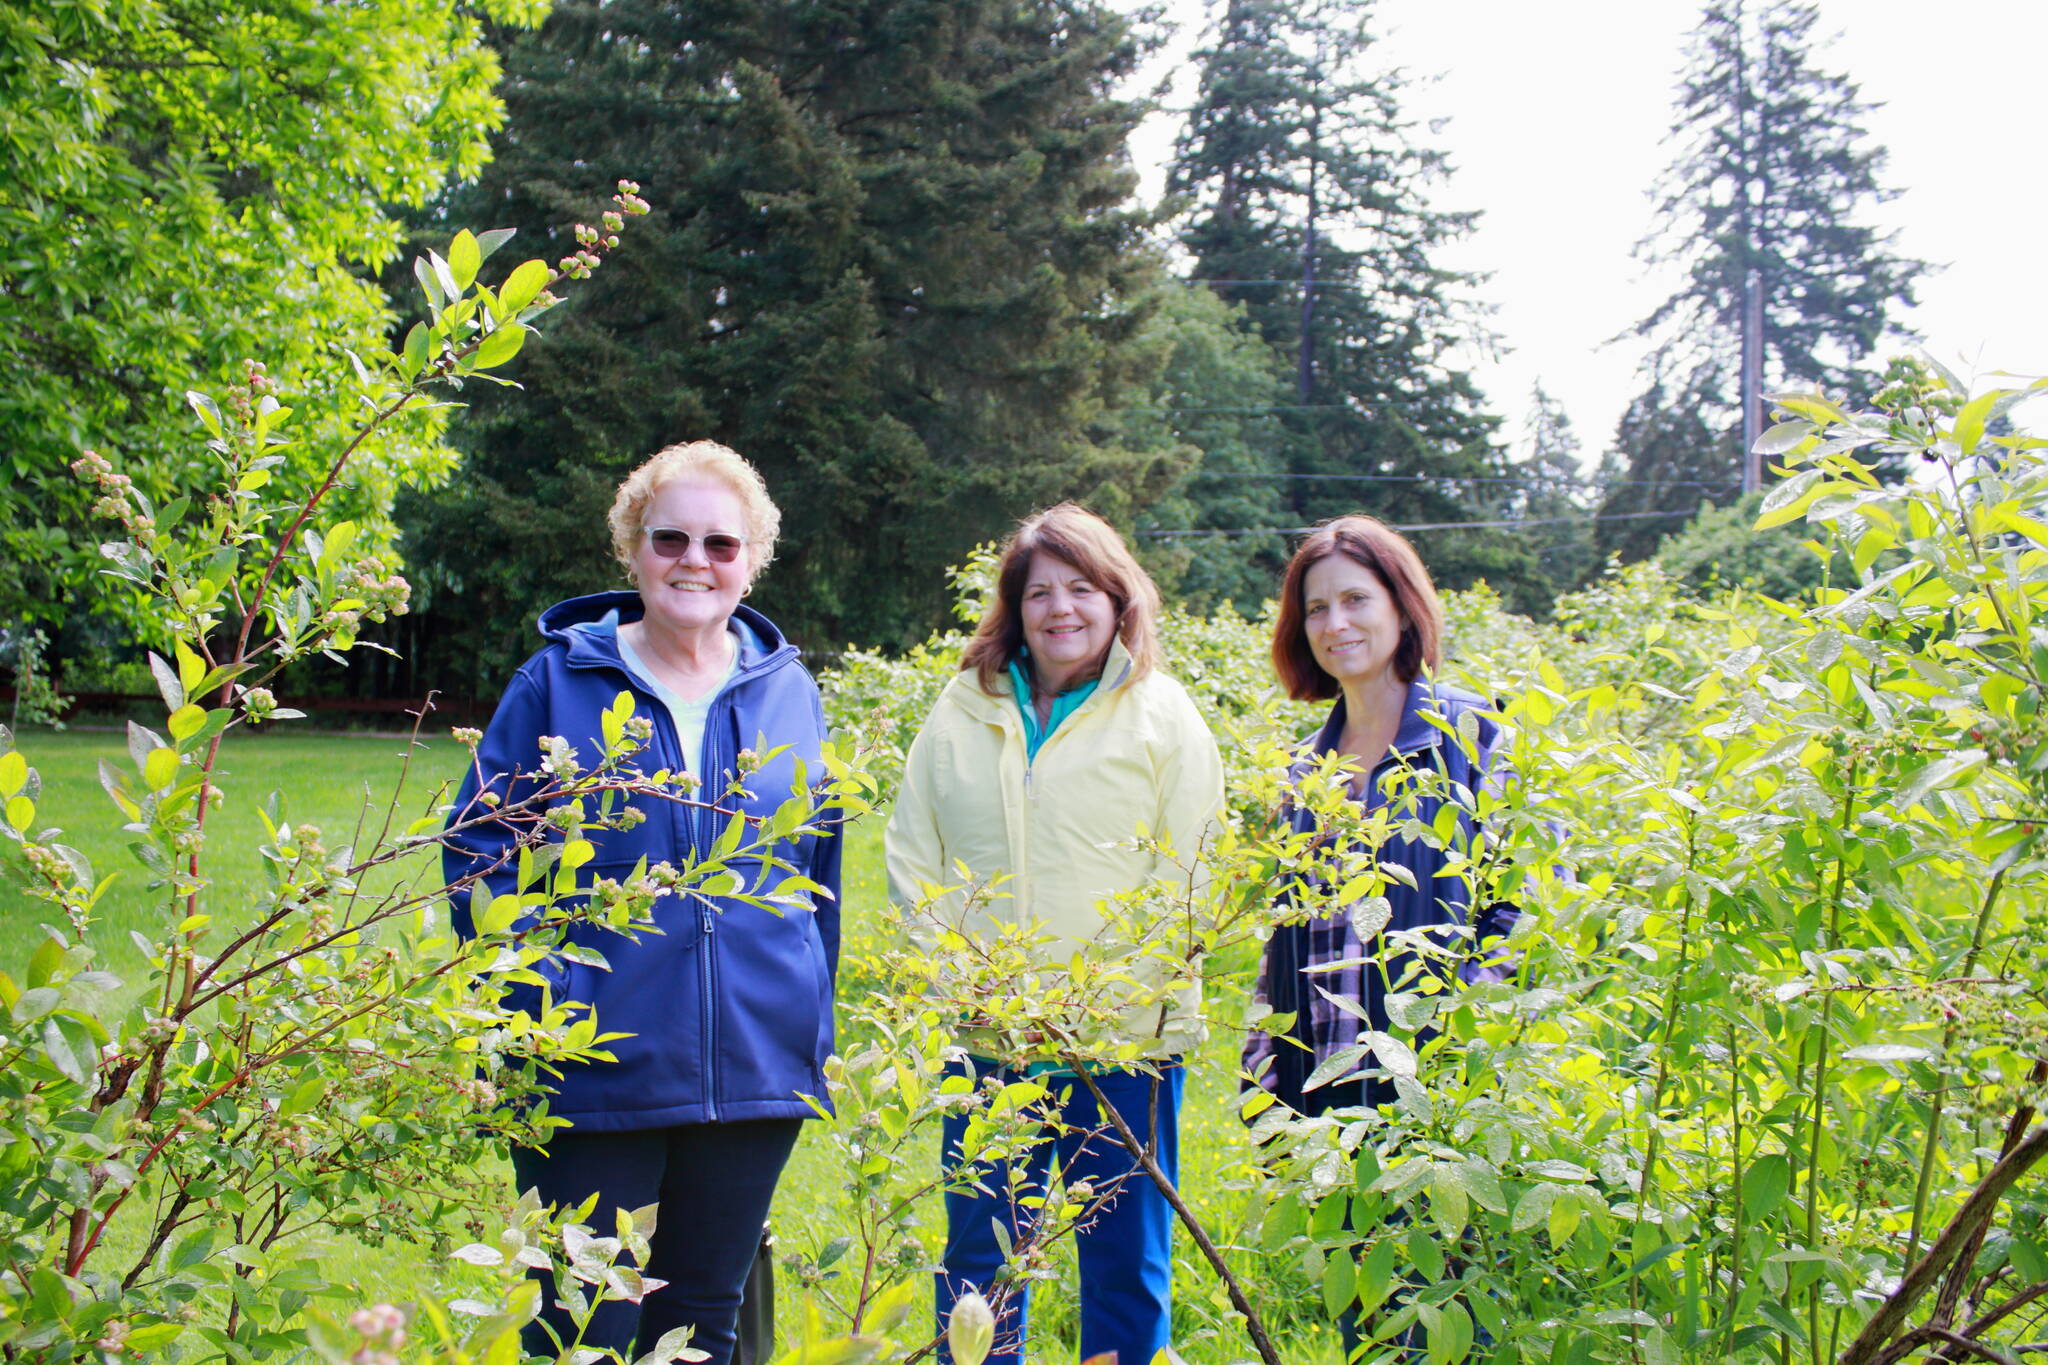 Members of the Marine Hills Garden club and Shelley Pauls of We Love Our City stand near the lush blueberry bushes at the Hylebos Blueberry Farm Park in Federal Way. Both organizations have been vital to the park’s restoration. Photos by Keelin Everly-Lang / The Mirror